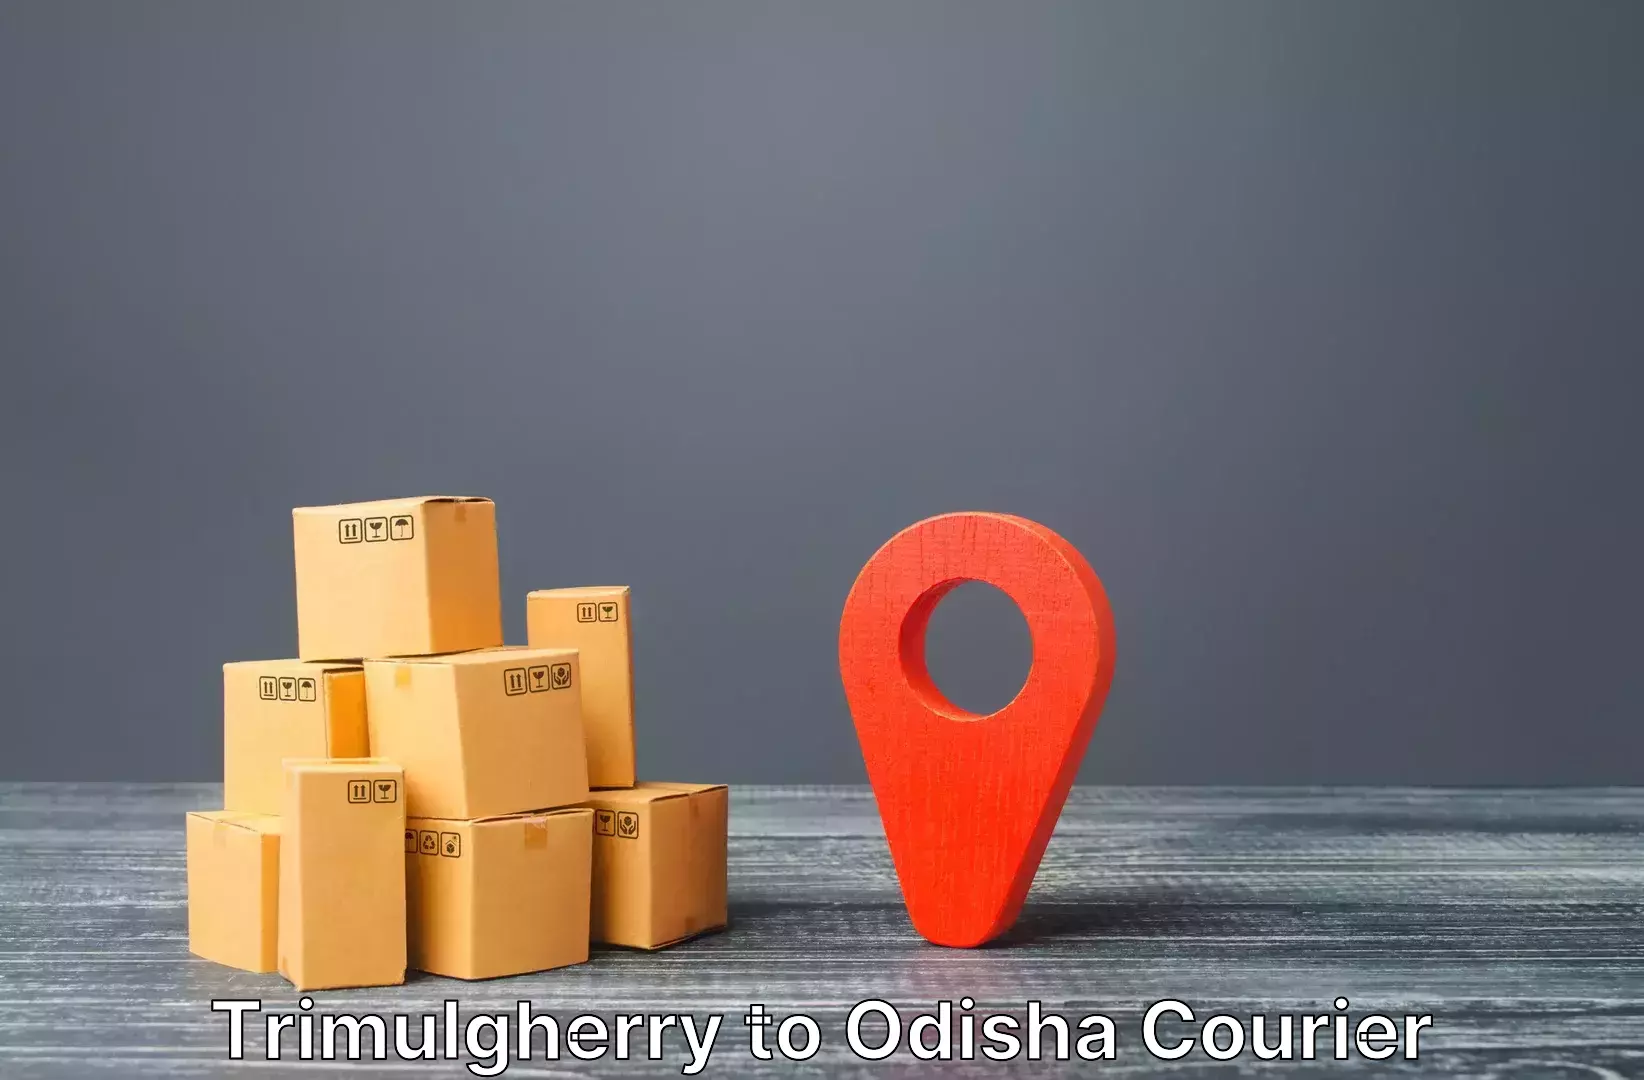 Online luggage shipping booking in Trimulgherry to Karanjia